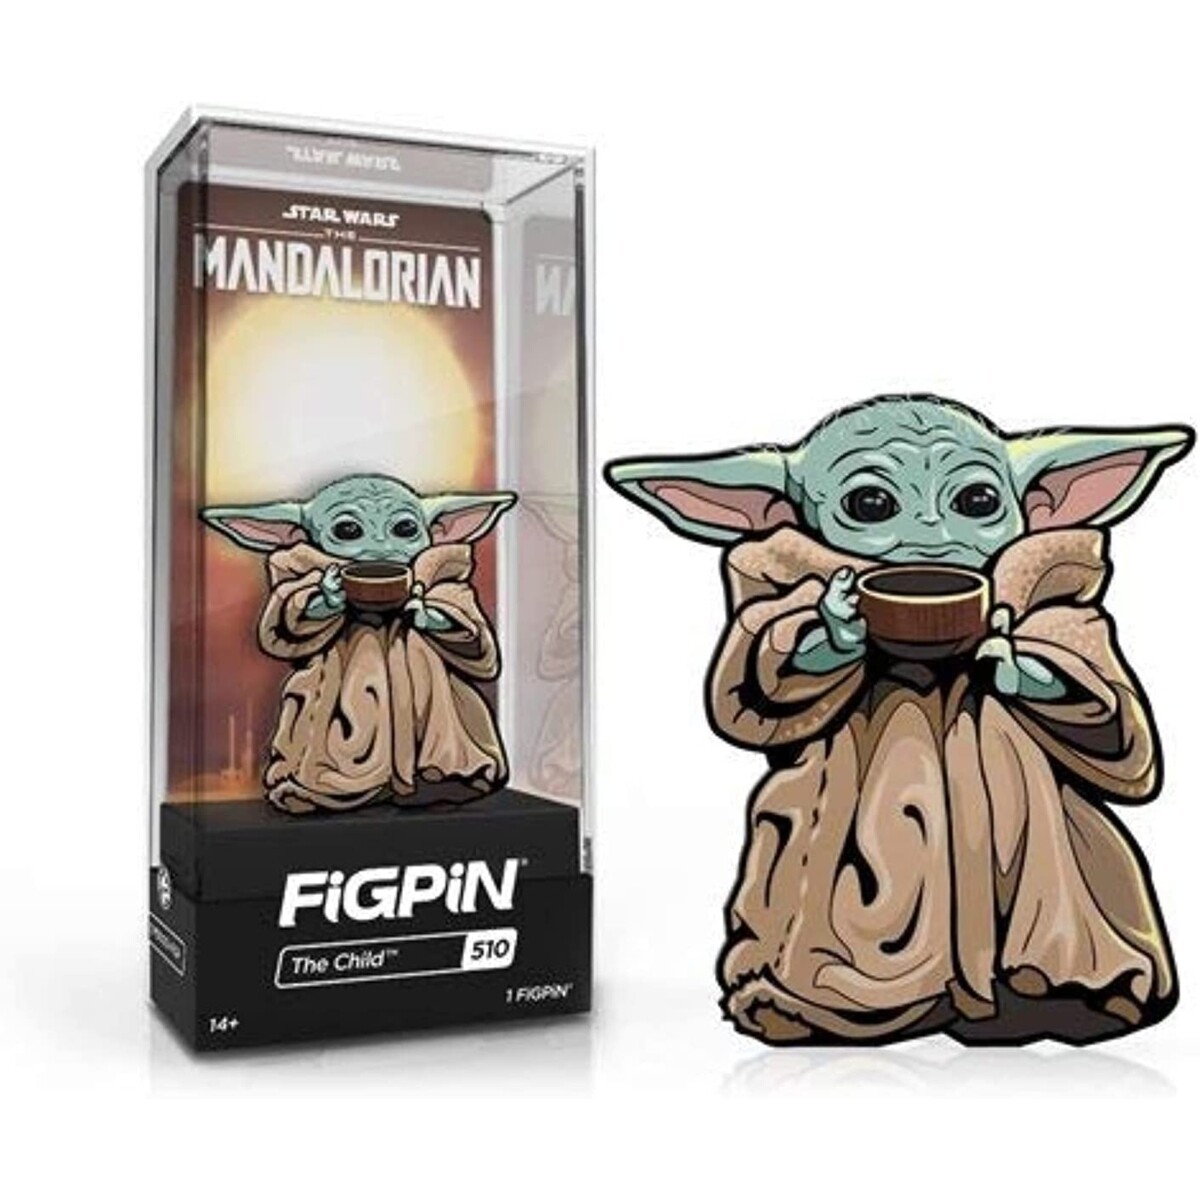 3"H The Child - The Mandalorian - FiGPiN #510 Collectible Pin